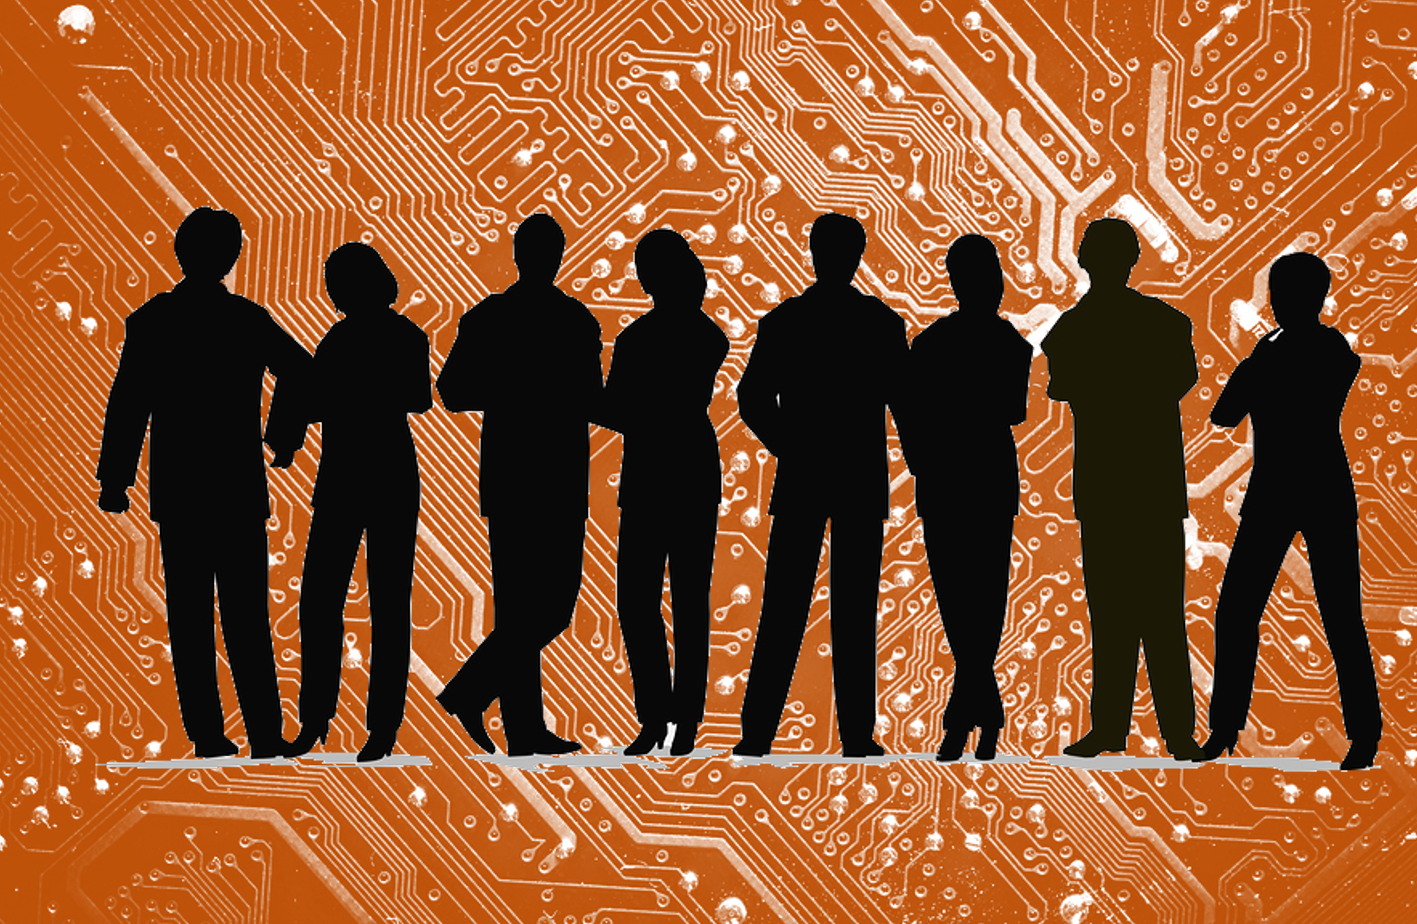 Representation of a circuit board overlaid with back silhouette of 8 people